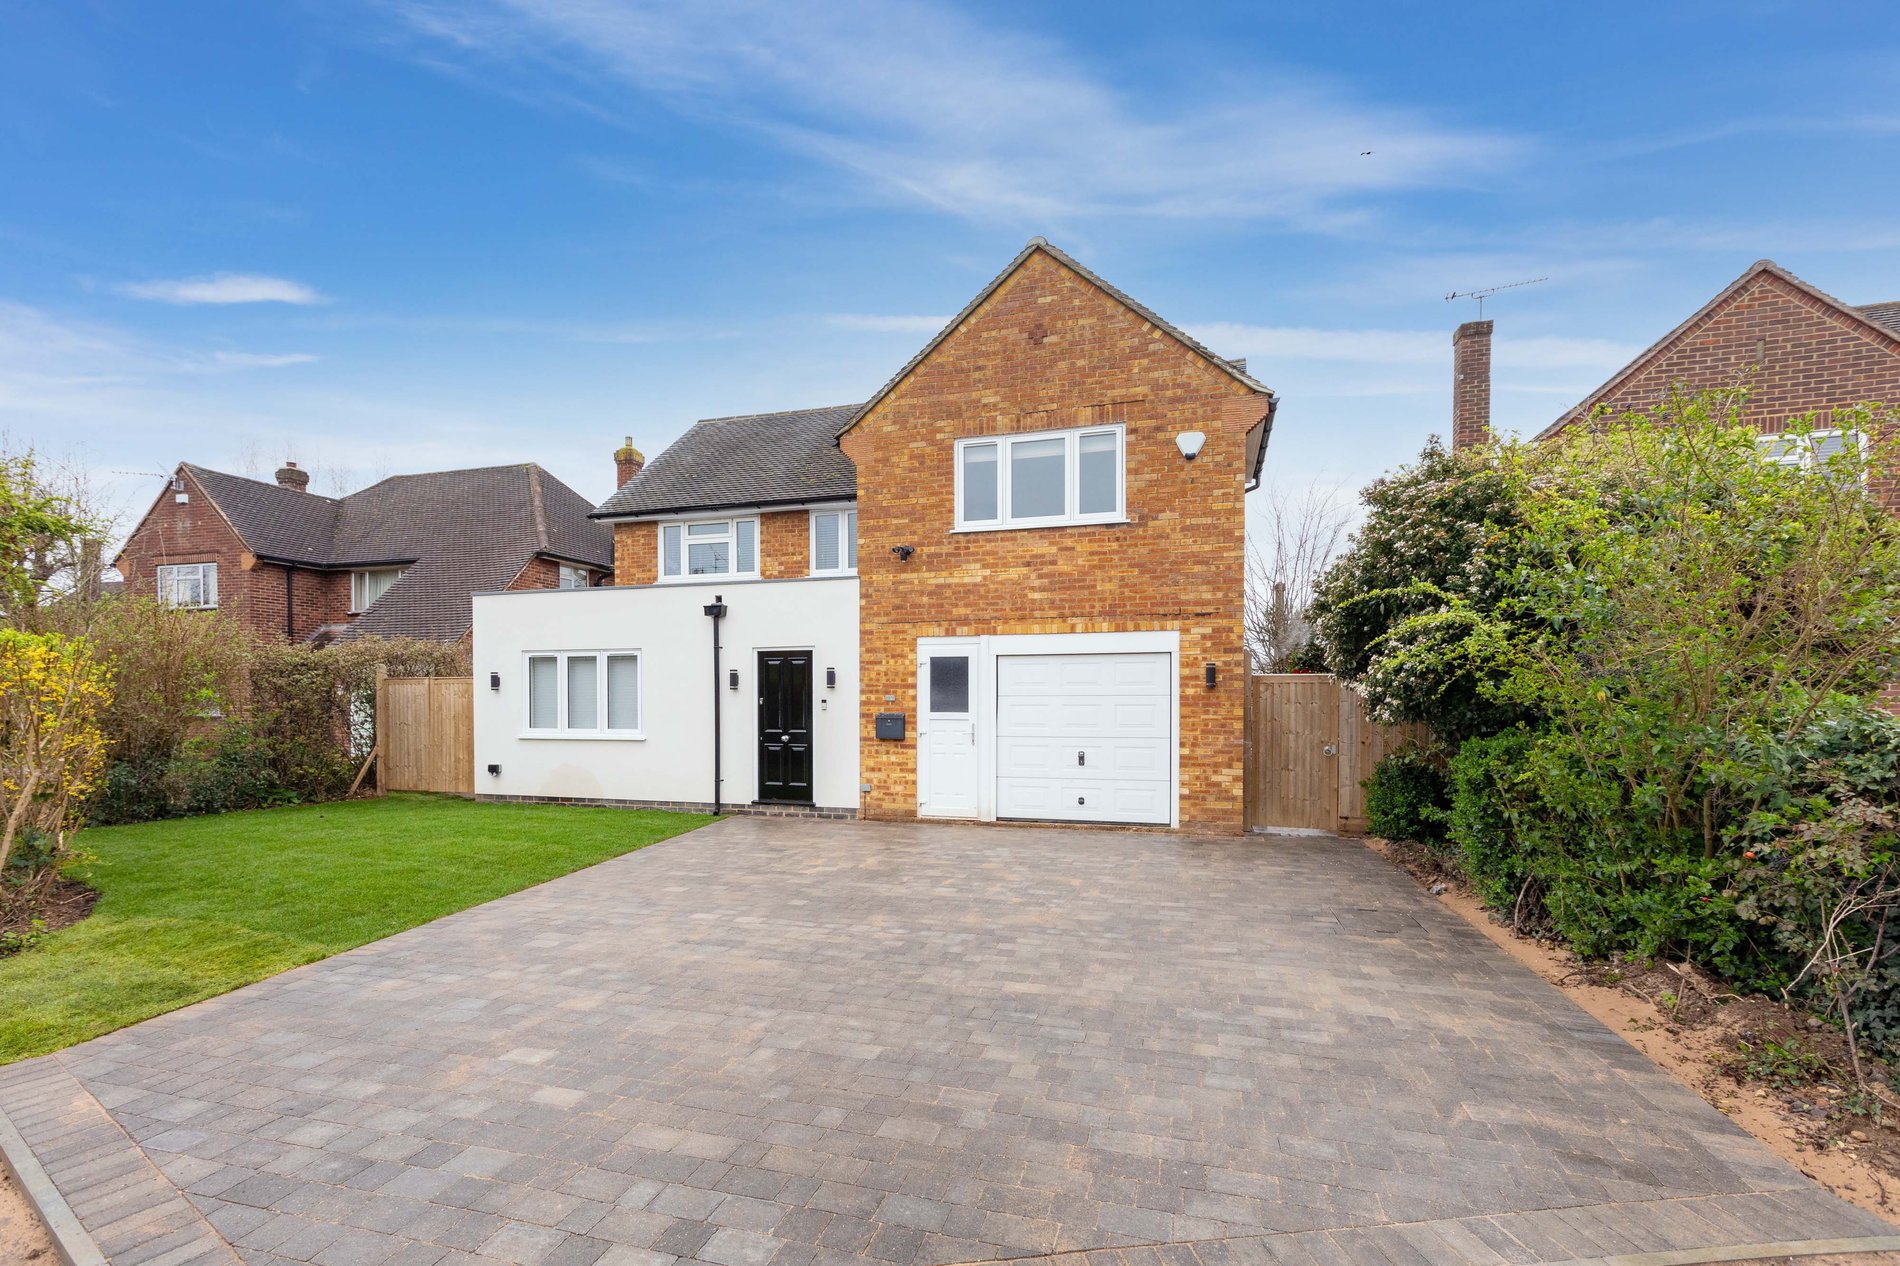 4 bed detached house for sale in Lees Close, Maidenhead - Property Image 1